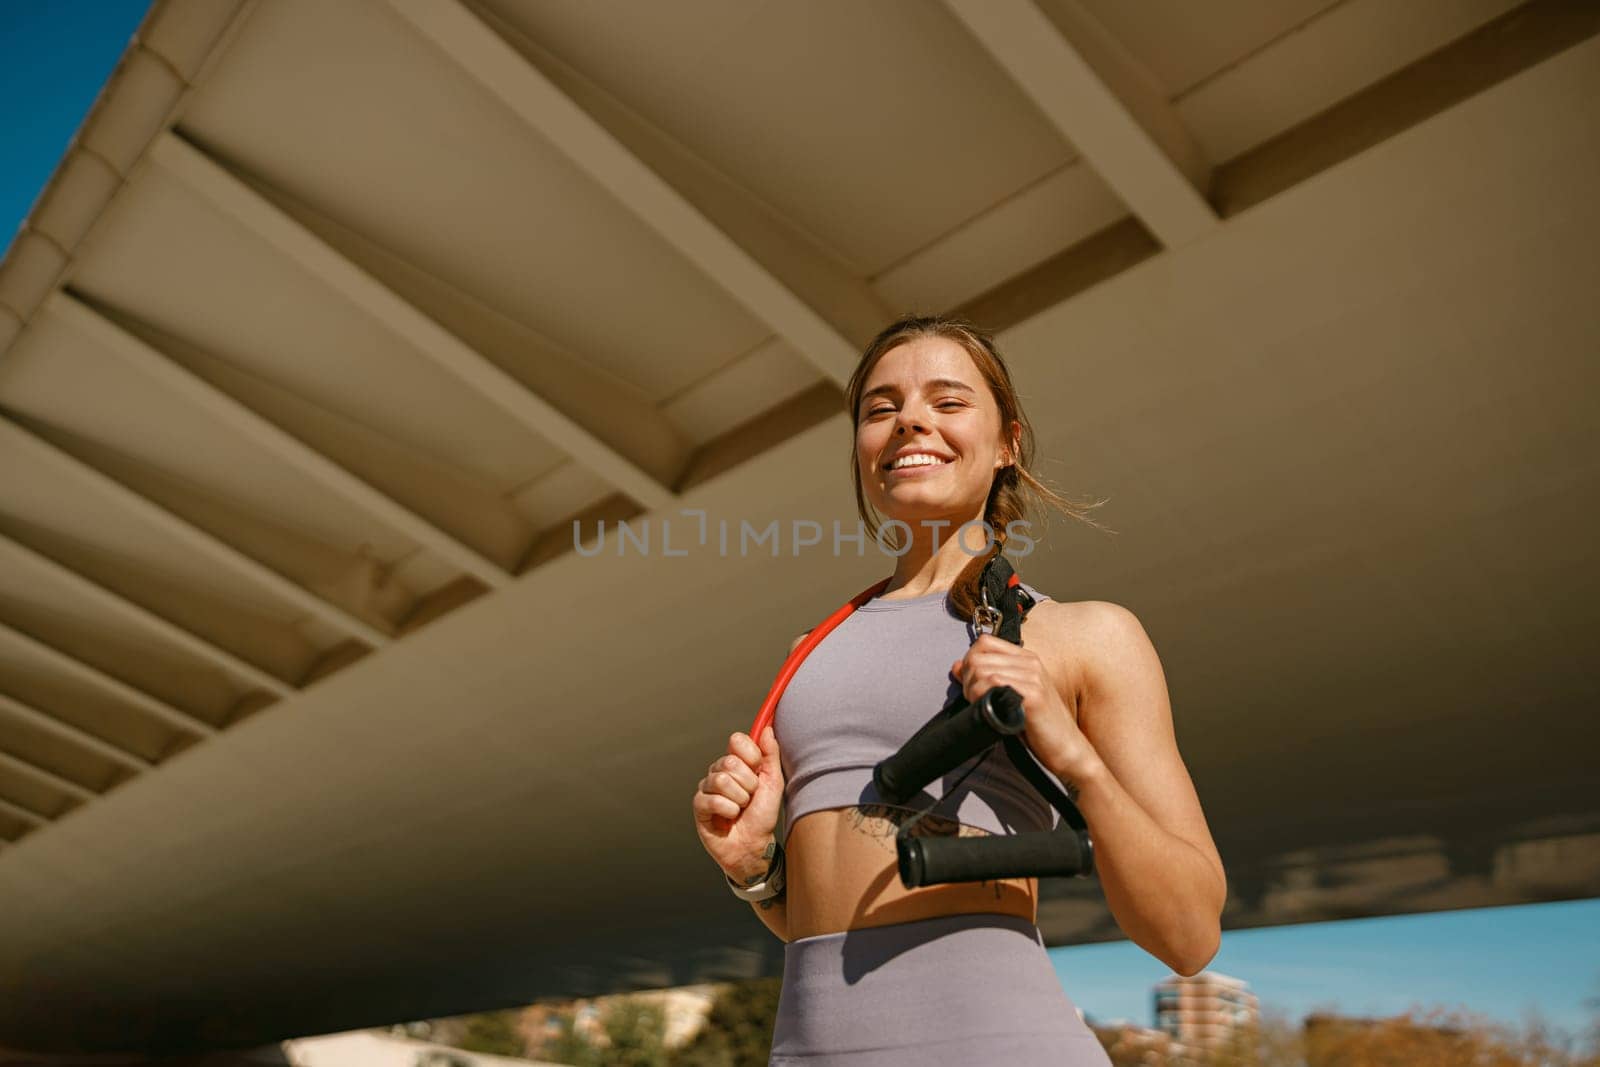 Beautiful athletic woman with a resistance band slung around her neck standing outdoors